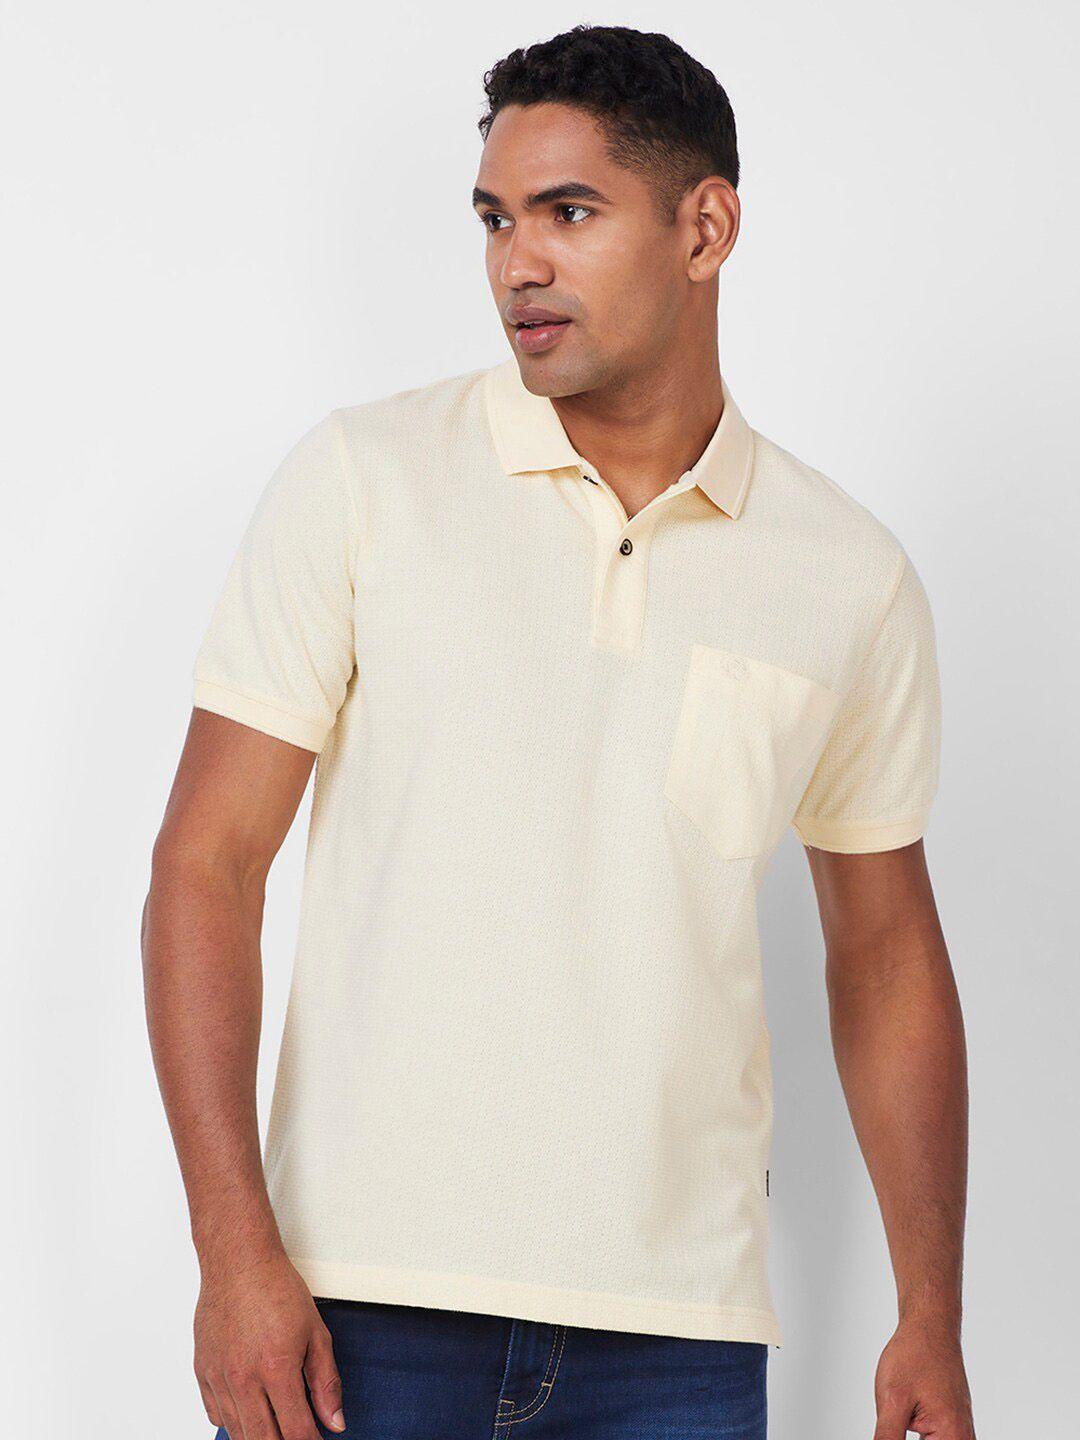 celsius polo collar pockets short sleeves cotton casual t-shirt